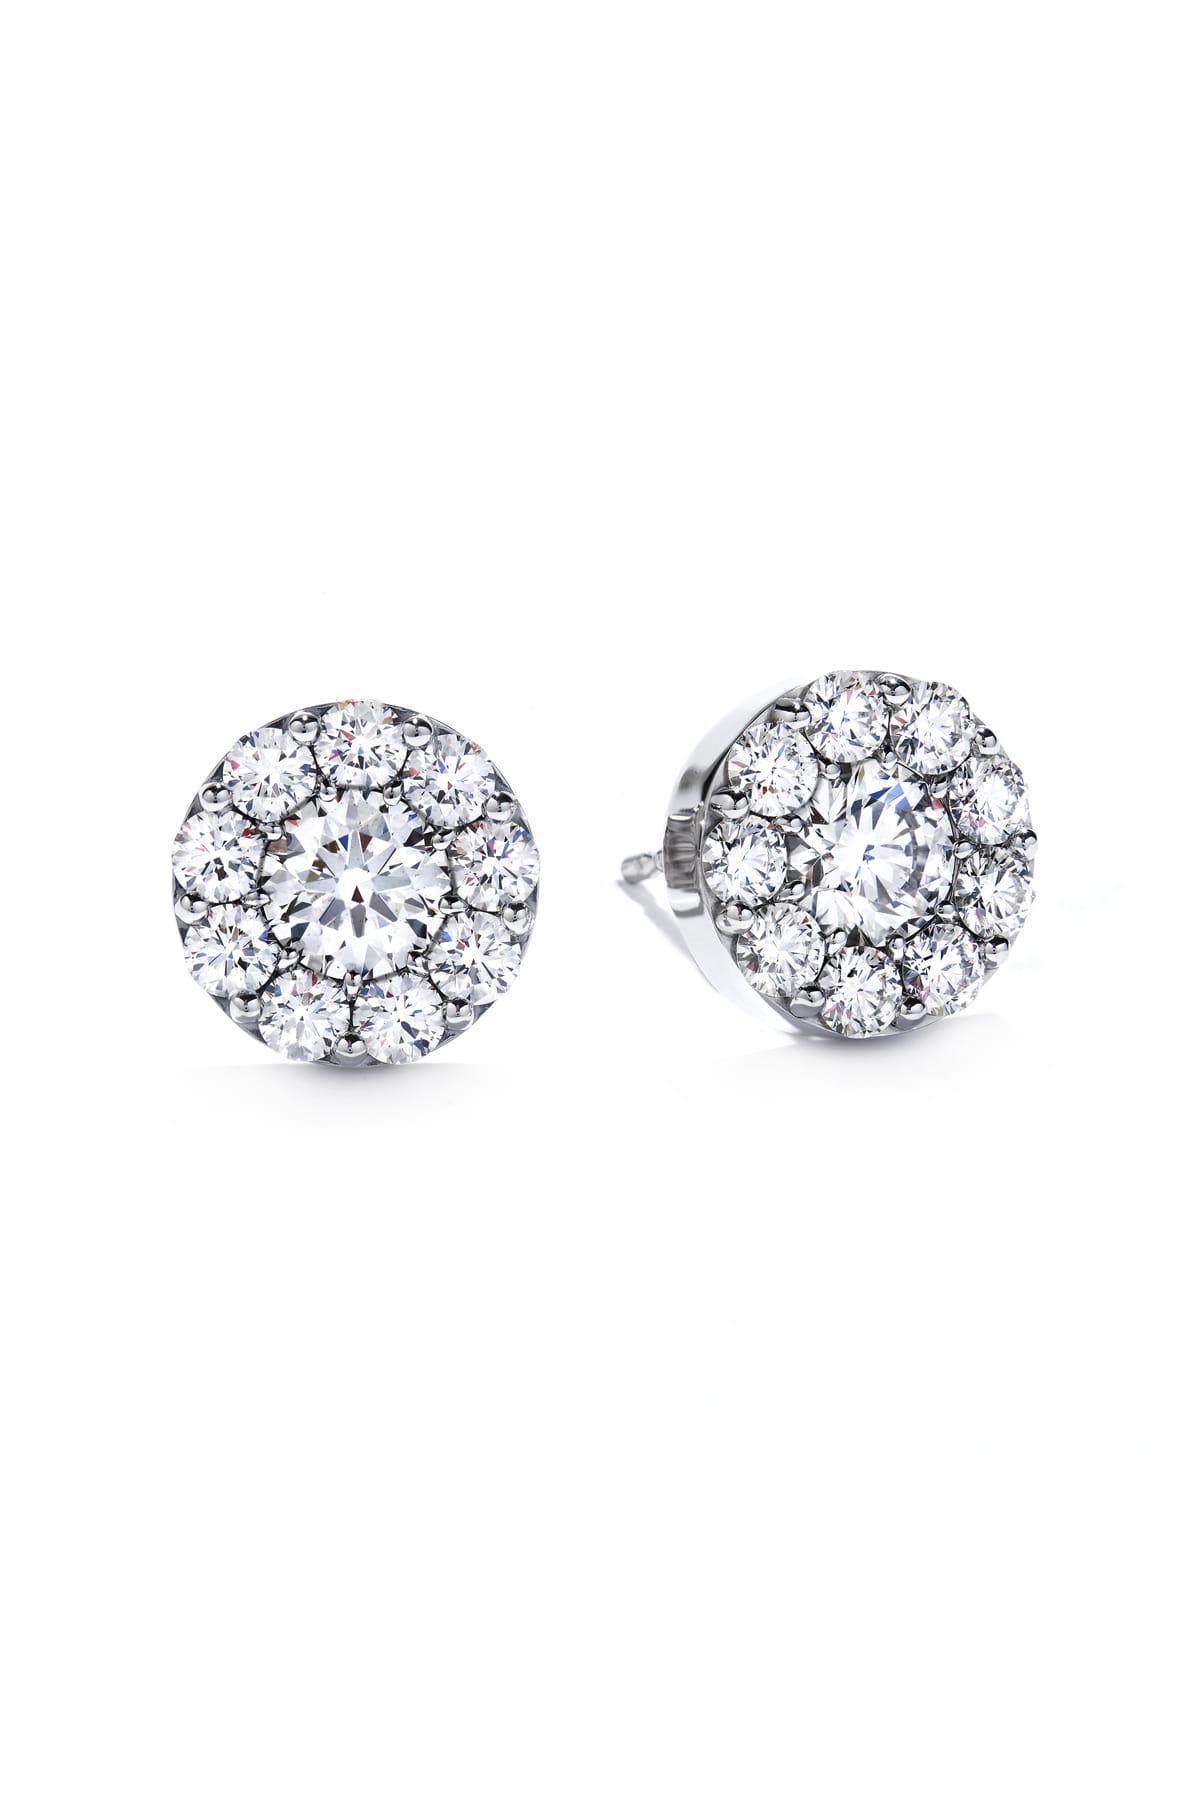 Fulfillment Diamond Stud Earrings From Hearts On Fire available at LeGassick Diamonds and Jewellery Gold Coast, Australia.